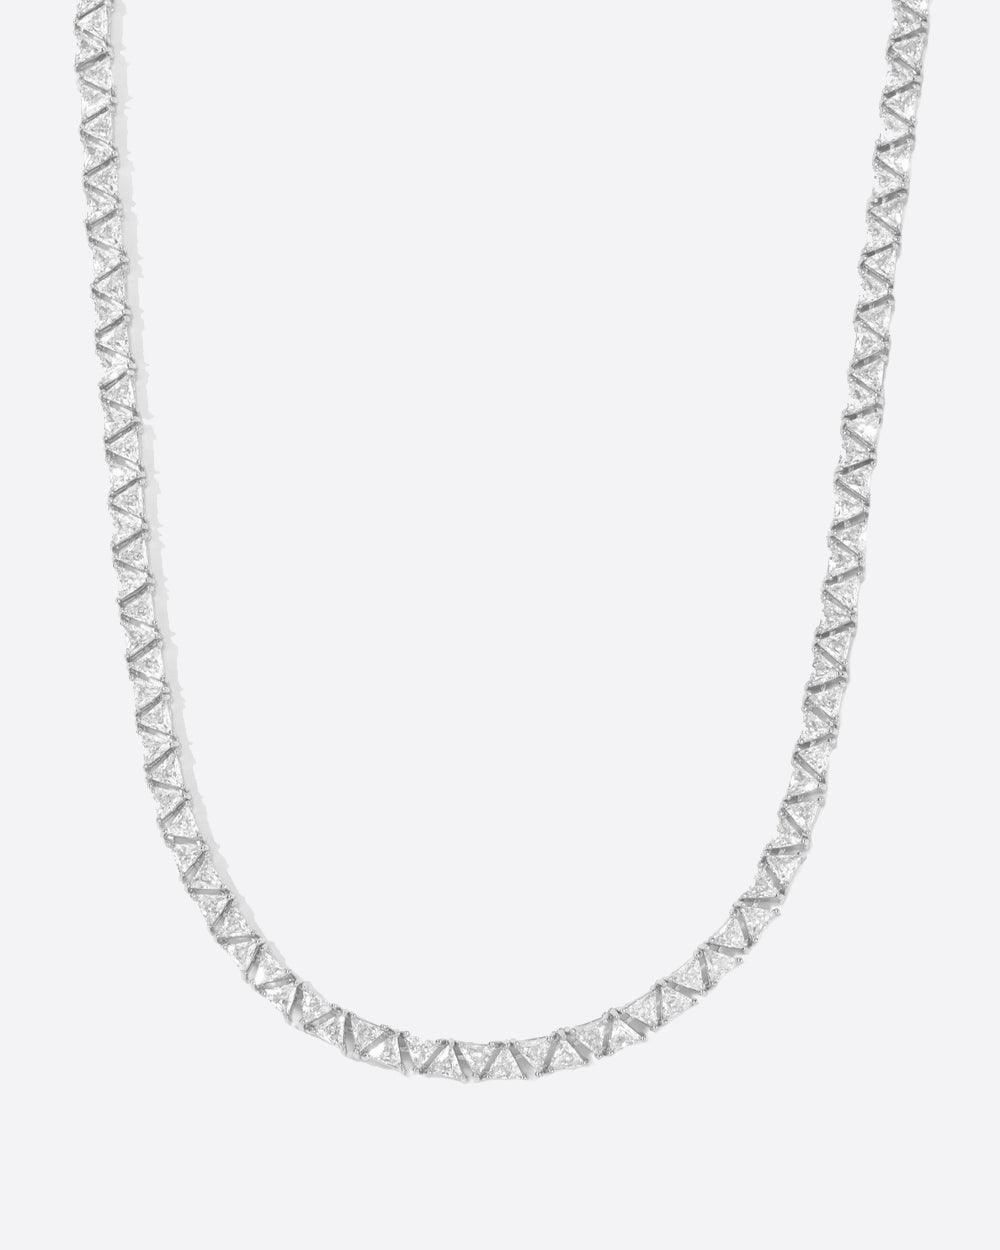 TRIANGLE TENNIS CHAIN. - 5MM WHITE GOLD - DRIP IN THE JEWEL